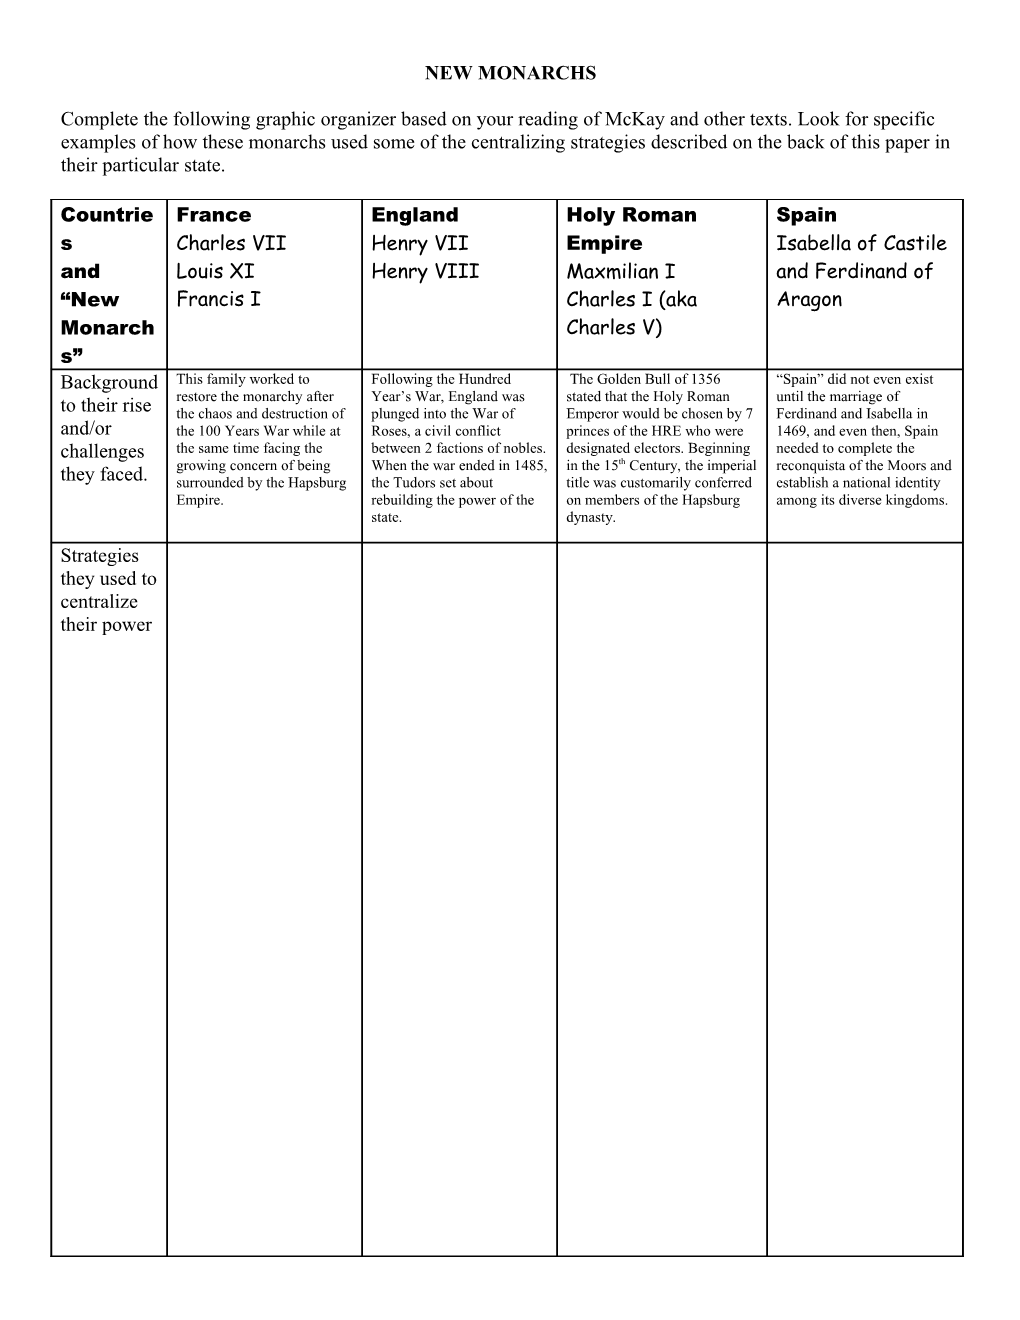 Complete the Following Graphic Organizer Based on Your Reading of Mckay and Other Texts